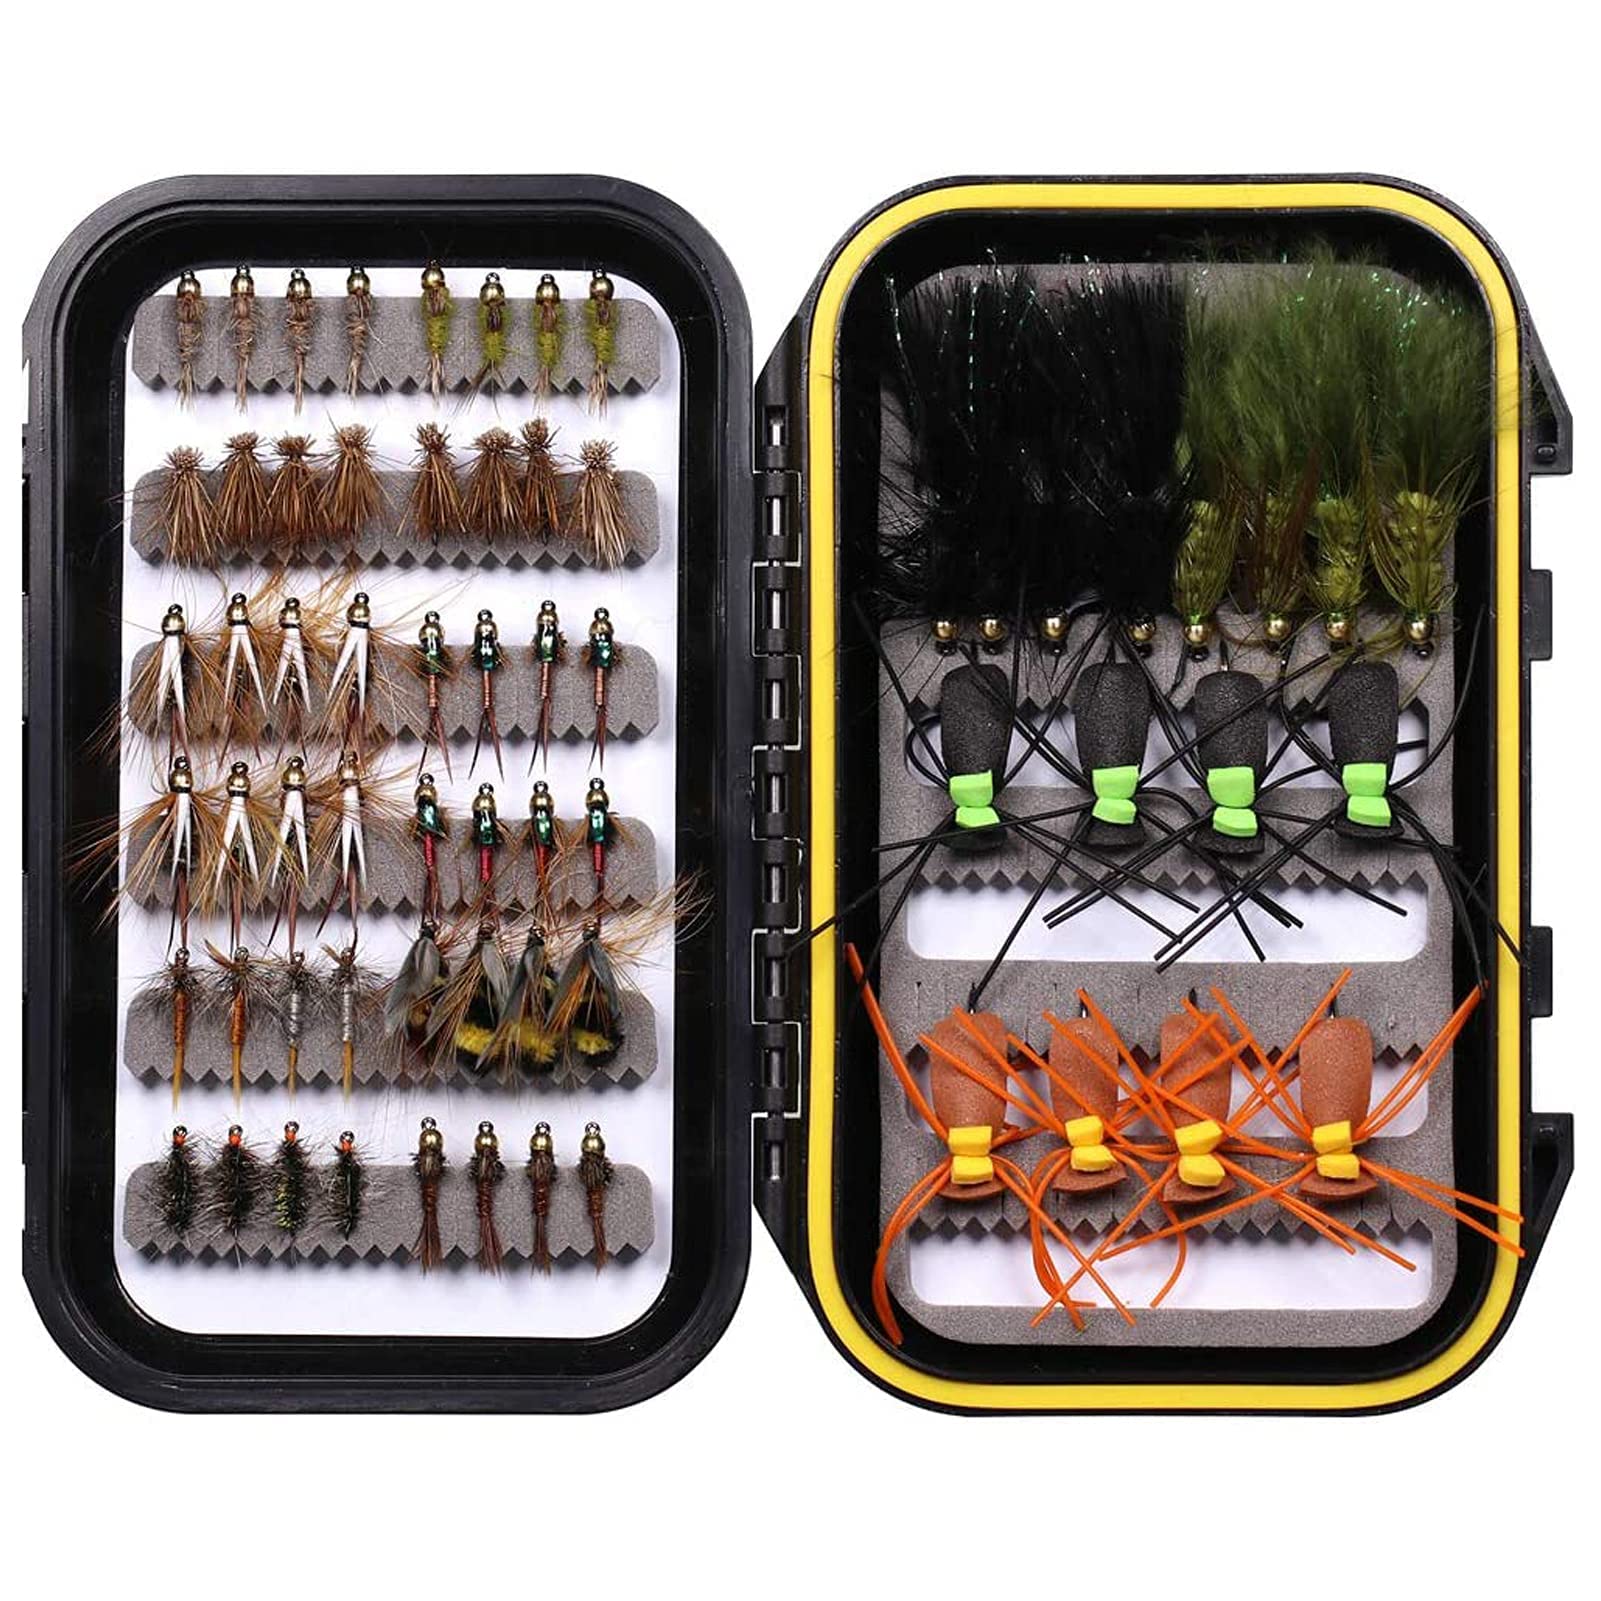 Wifreo Fly Fishing Flies Assortment,Flyfishing Flies Trout,Fly Fishing Gear  with Waterproof Fly Box,Fly Fishing Gifts,Fly Fishing Lures,Fly Fishing  Accessories 64 pcs flies kit+fly box